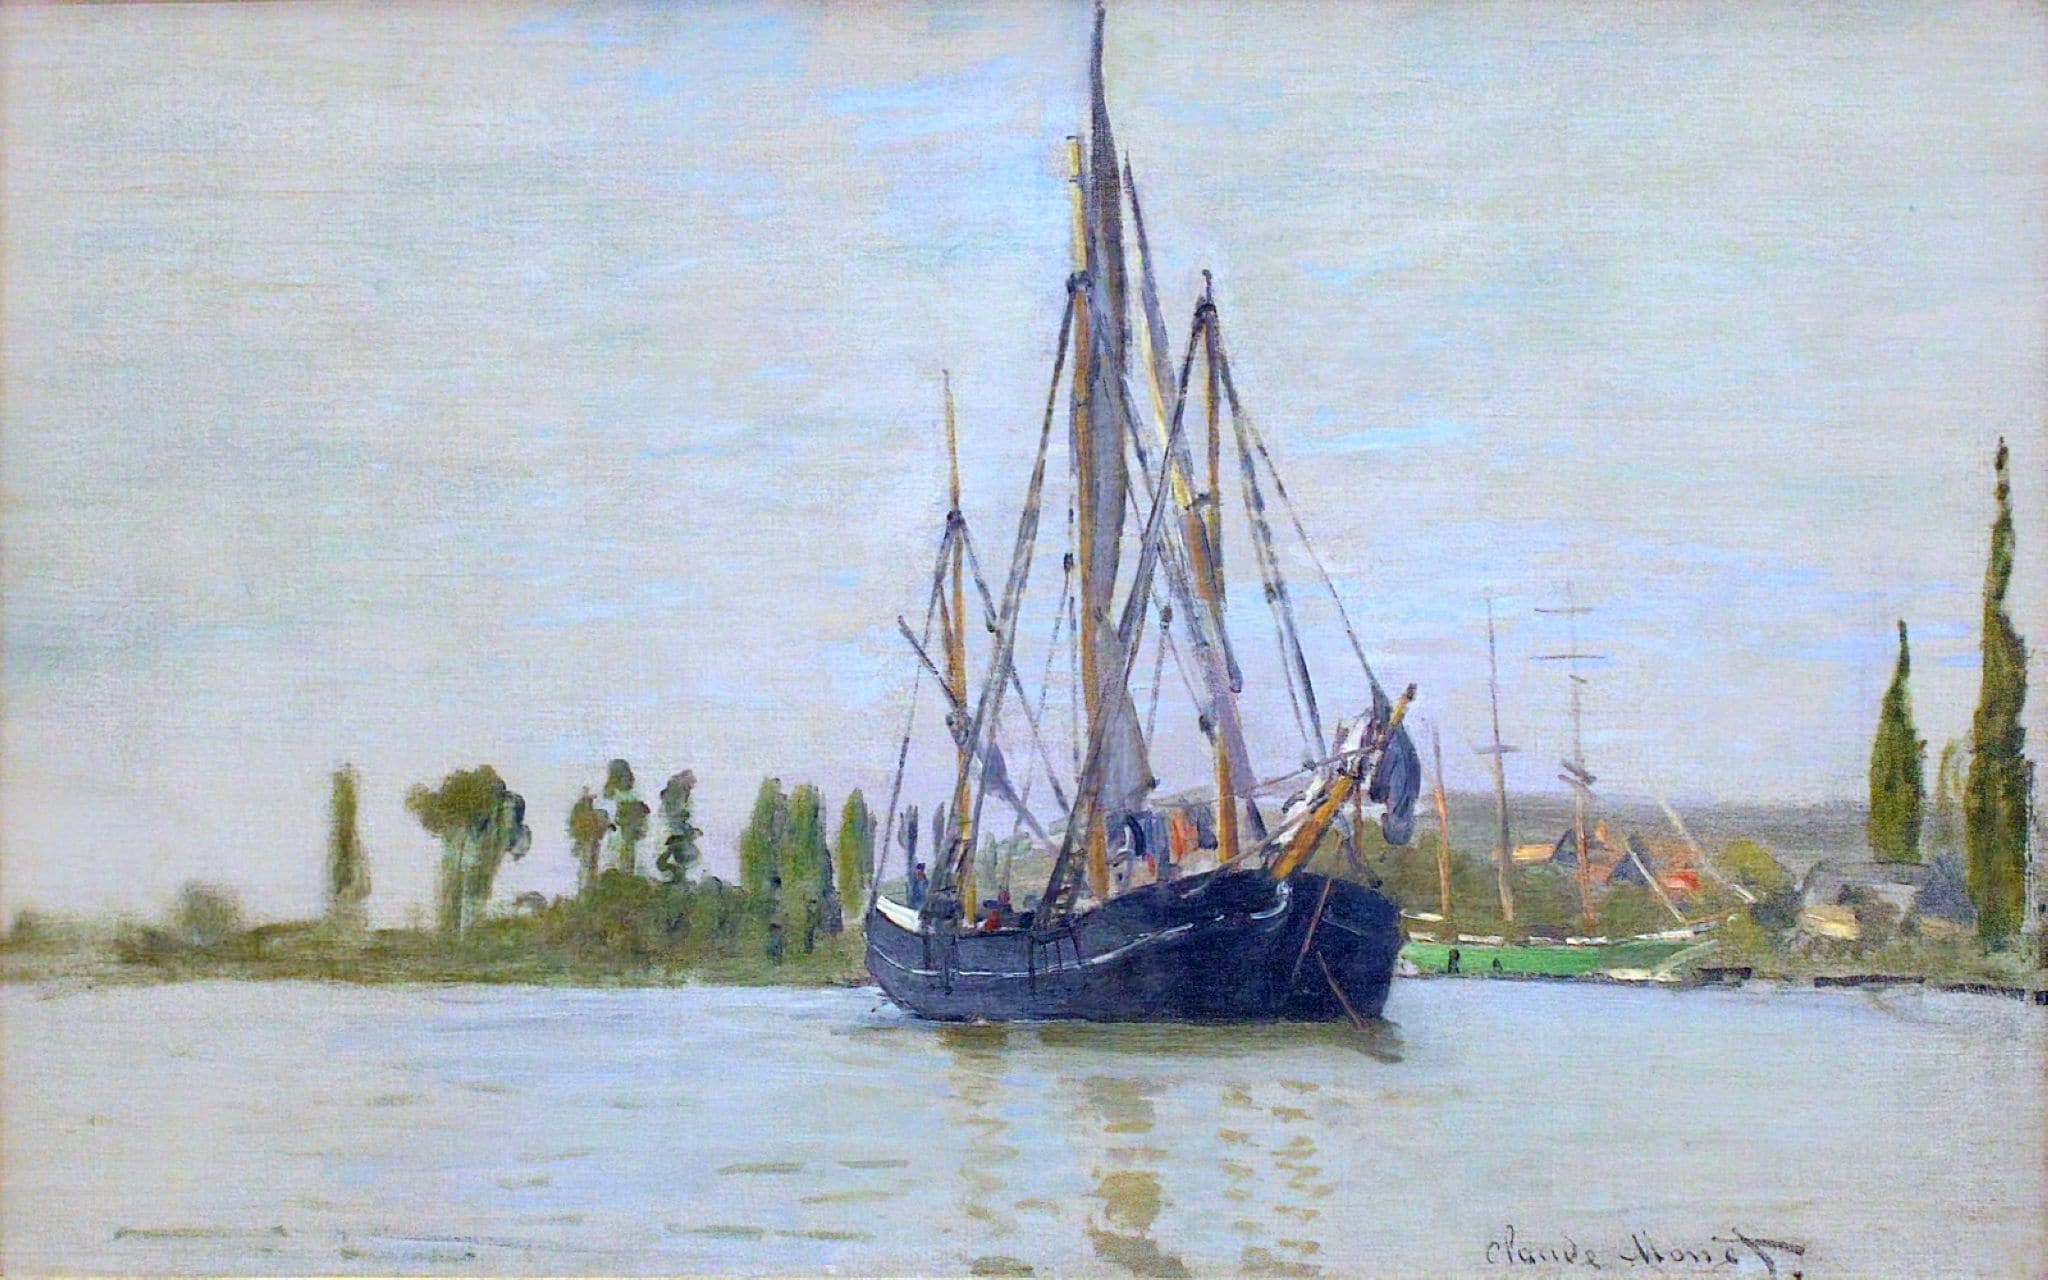 Monet_Chasse-maree_a_l'ancre_Musee_d'Orsay